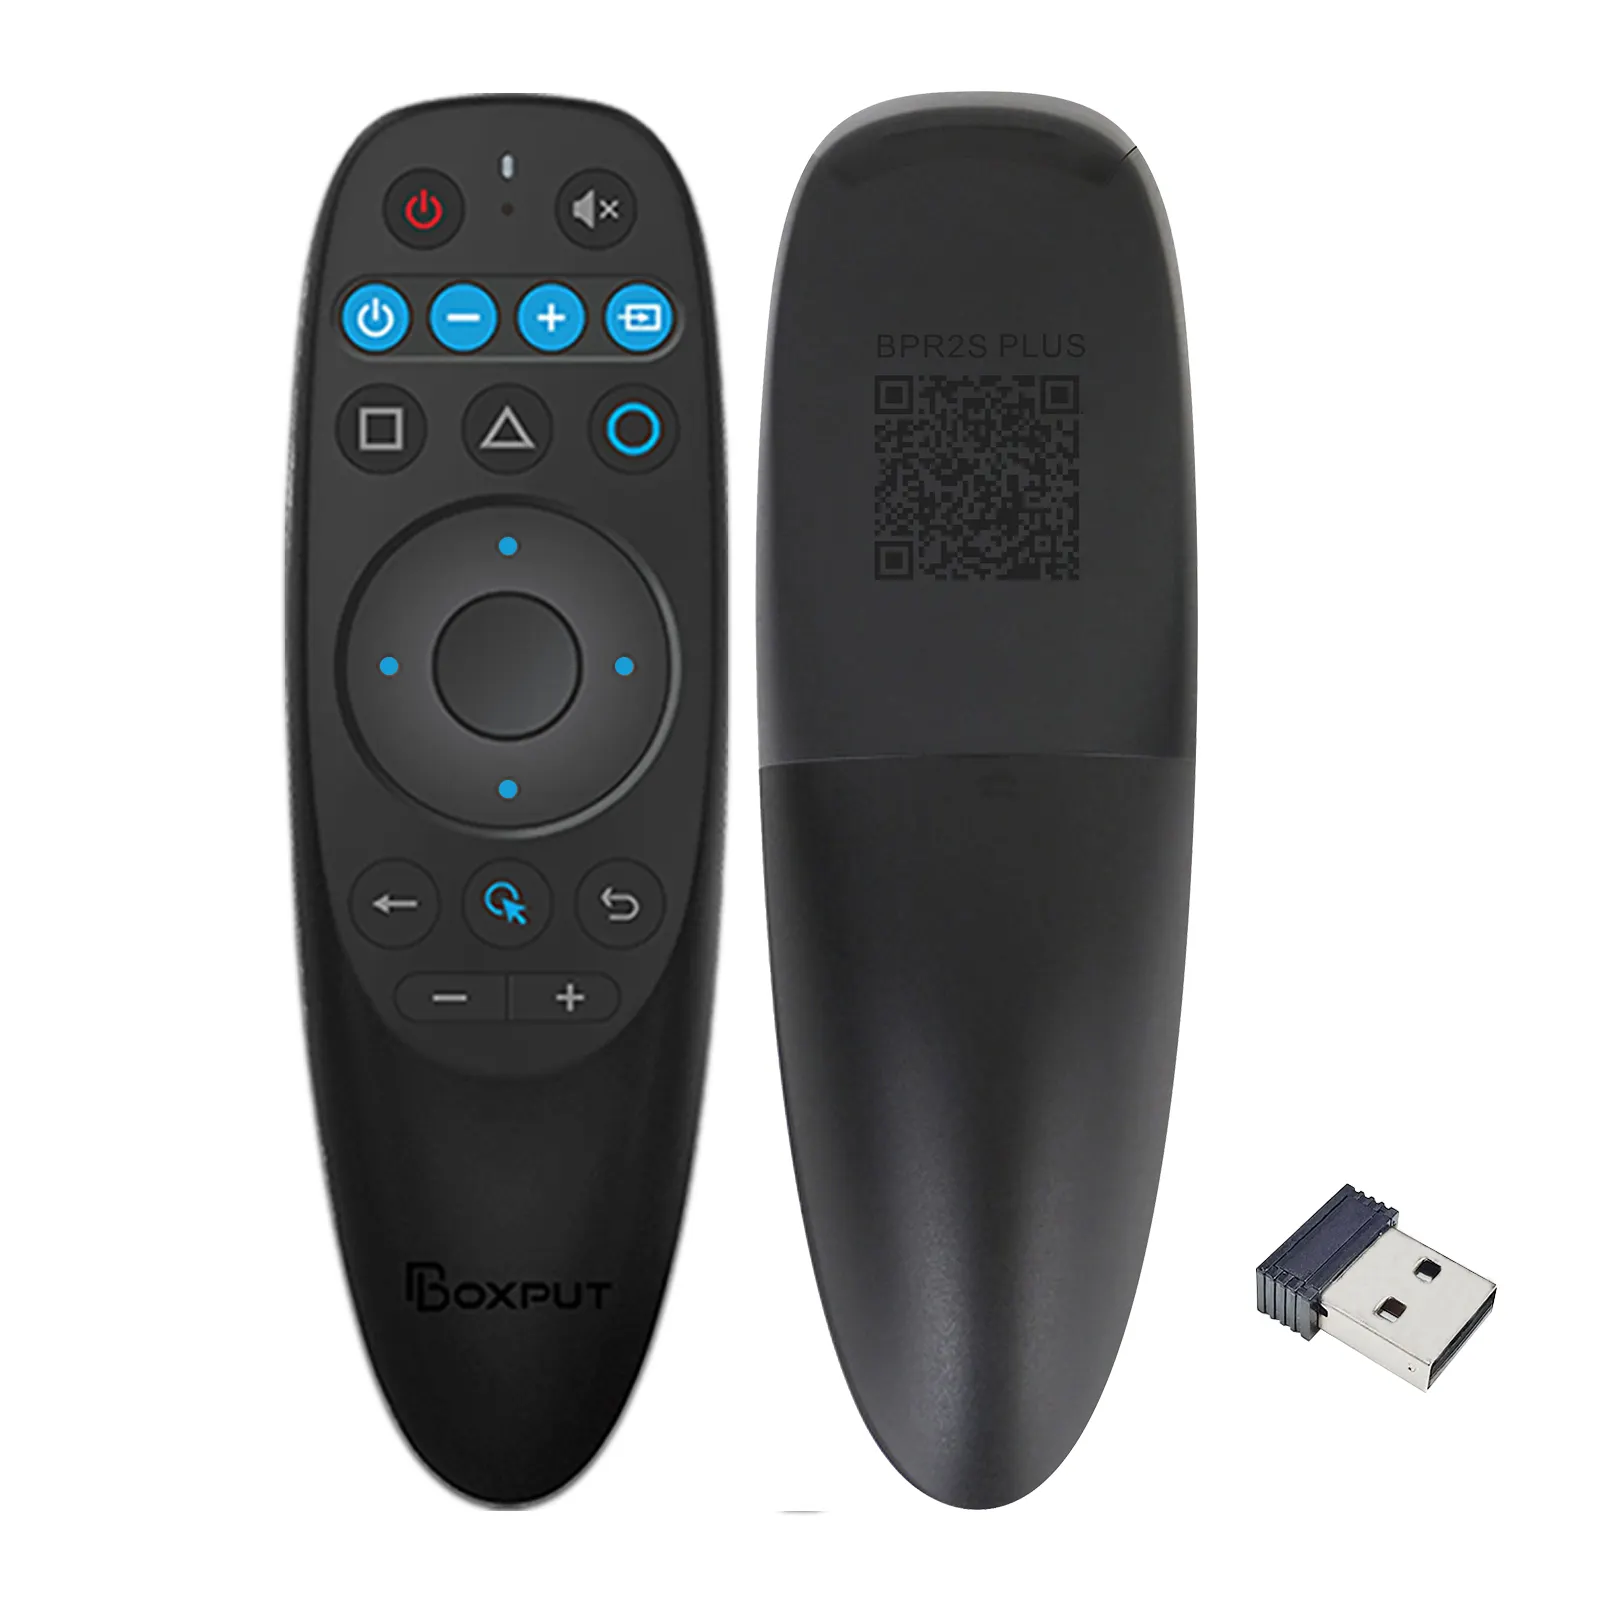 2023 Boxput Bpr 2S Plus Bt5.0 2.4G Dual Mode Draadloze Afstandsbediening 6-As Gyro Stem Assistent Air Mouse Ota Voor Android Tv Box